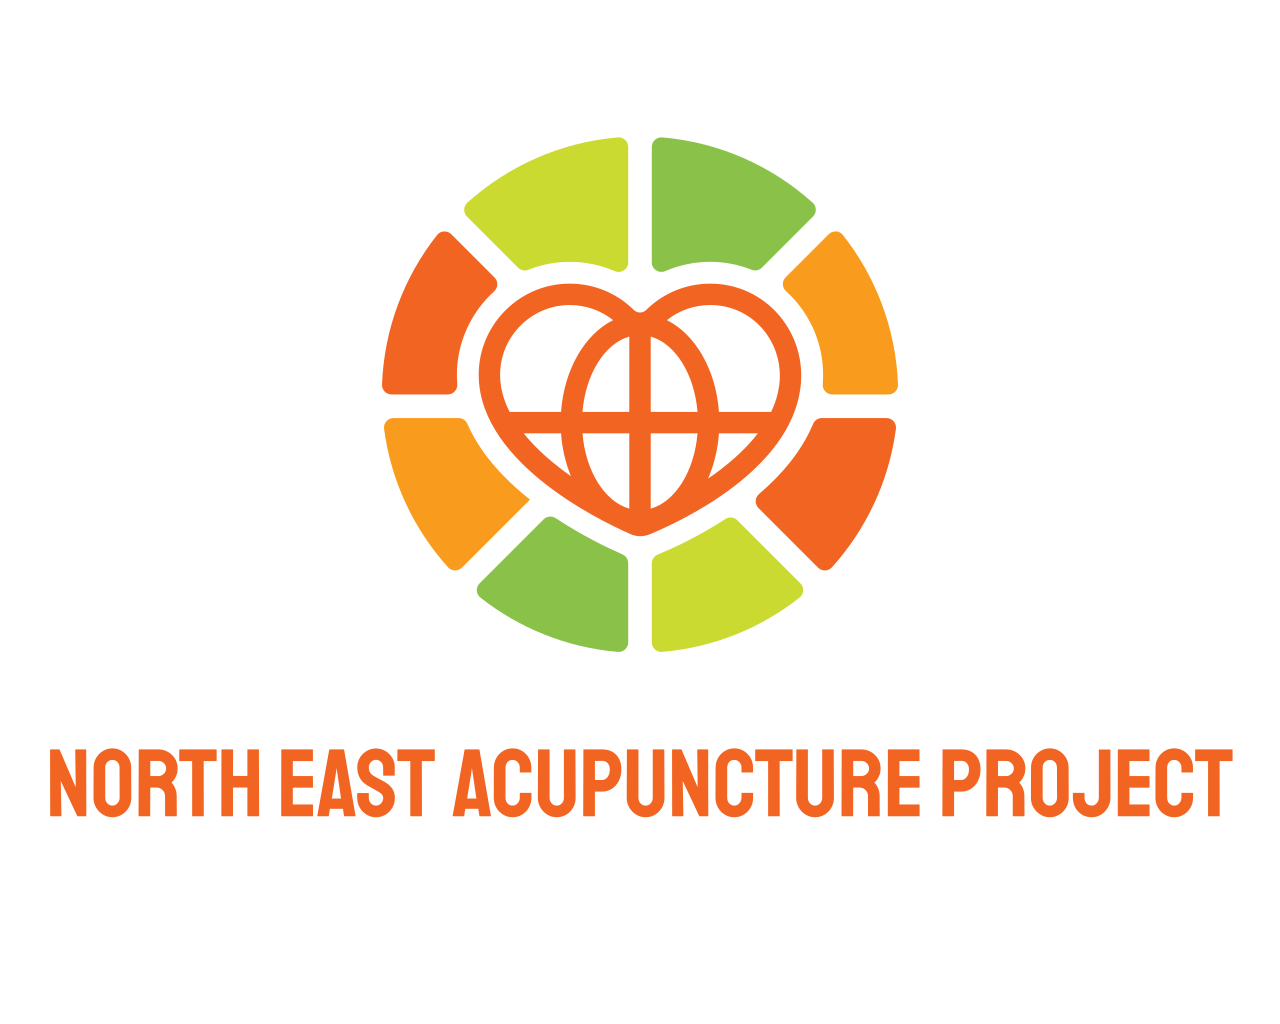 North East Acupuncture Project